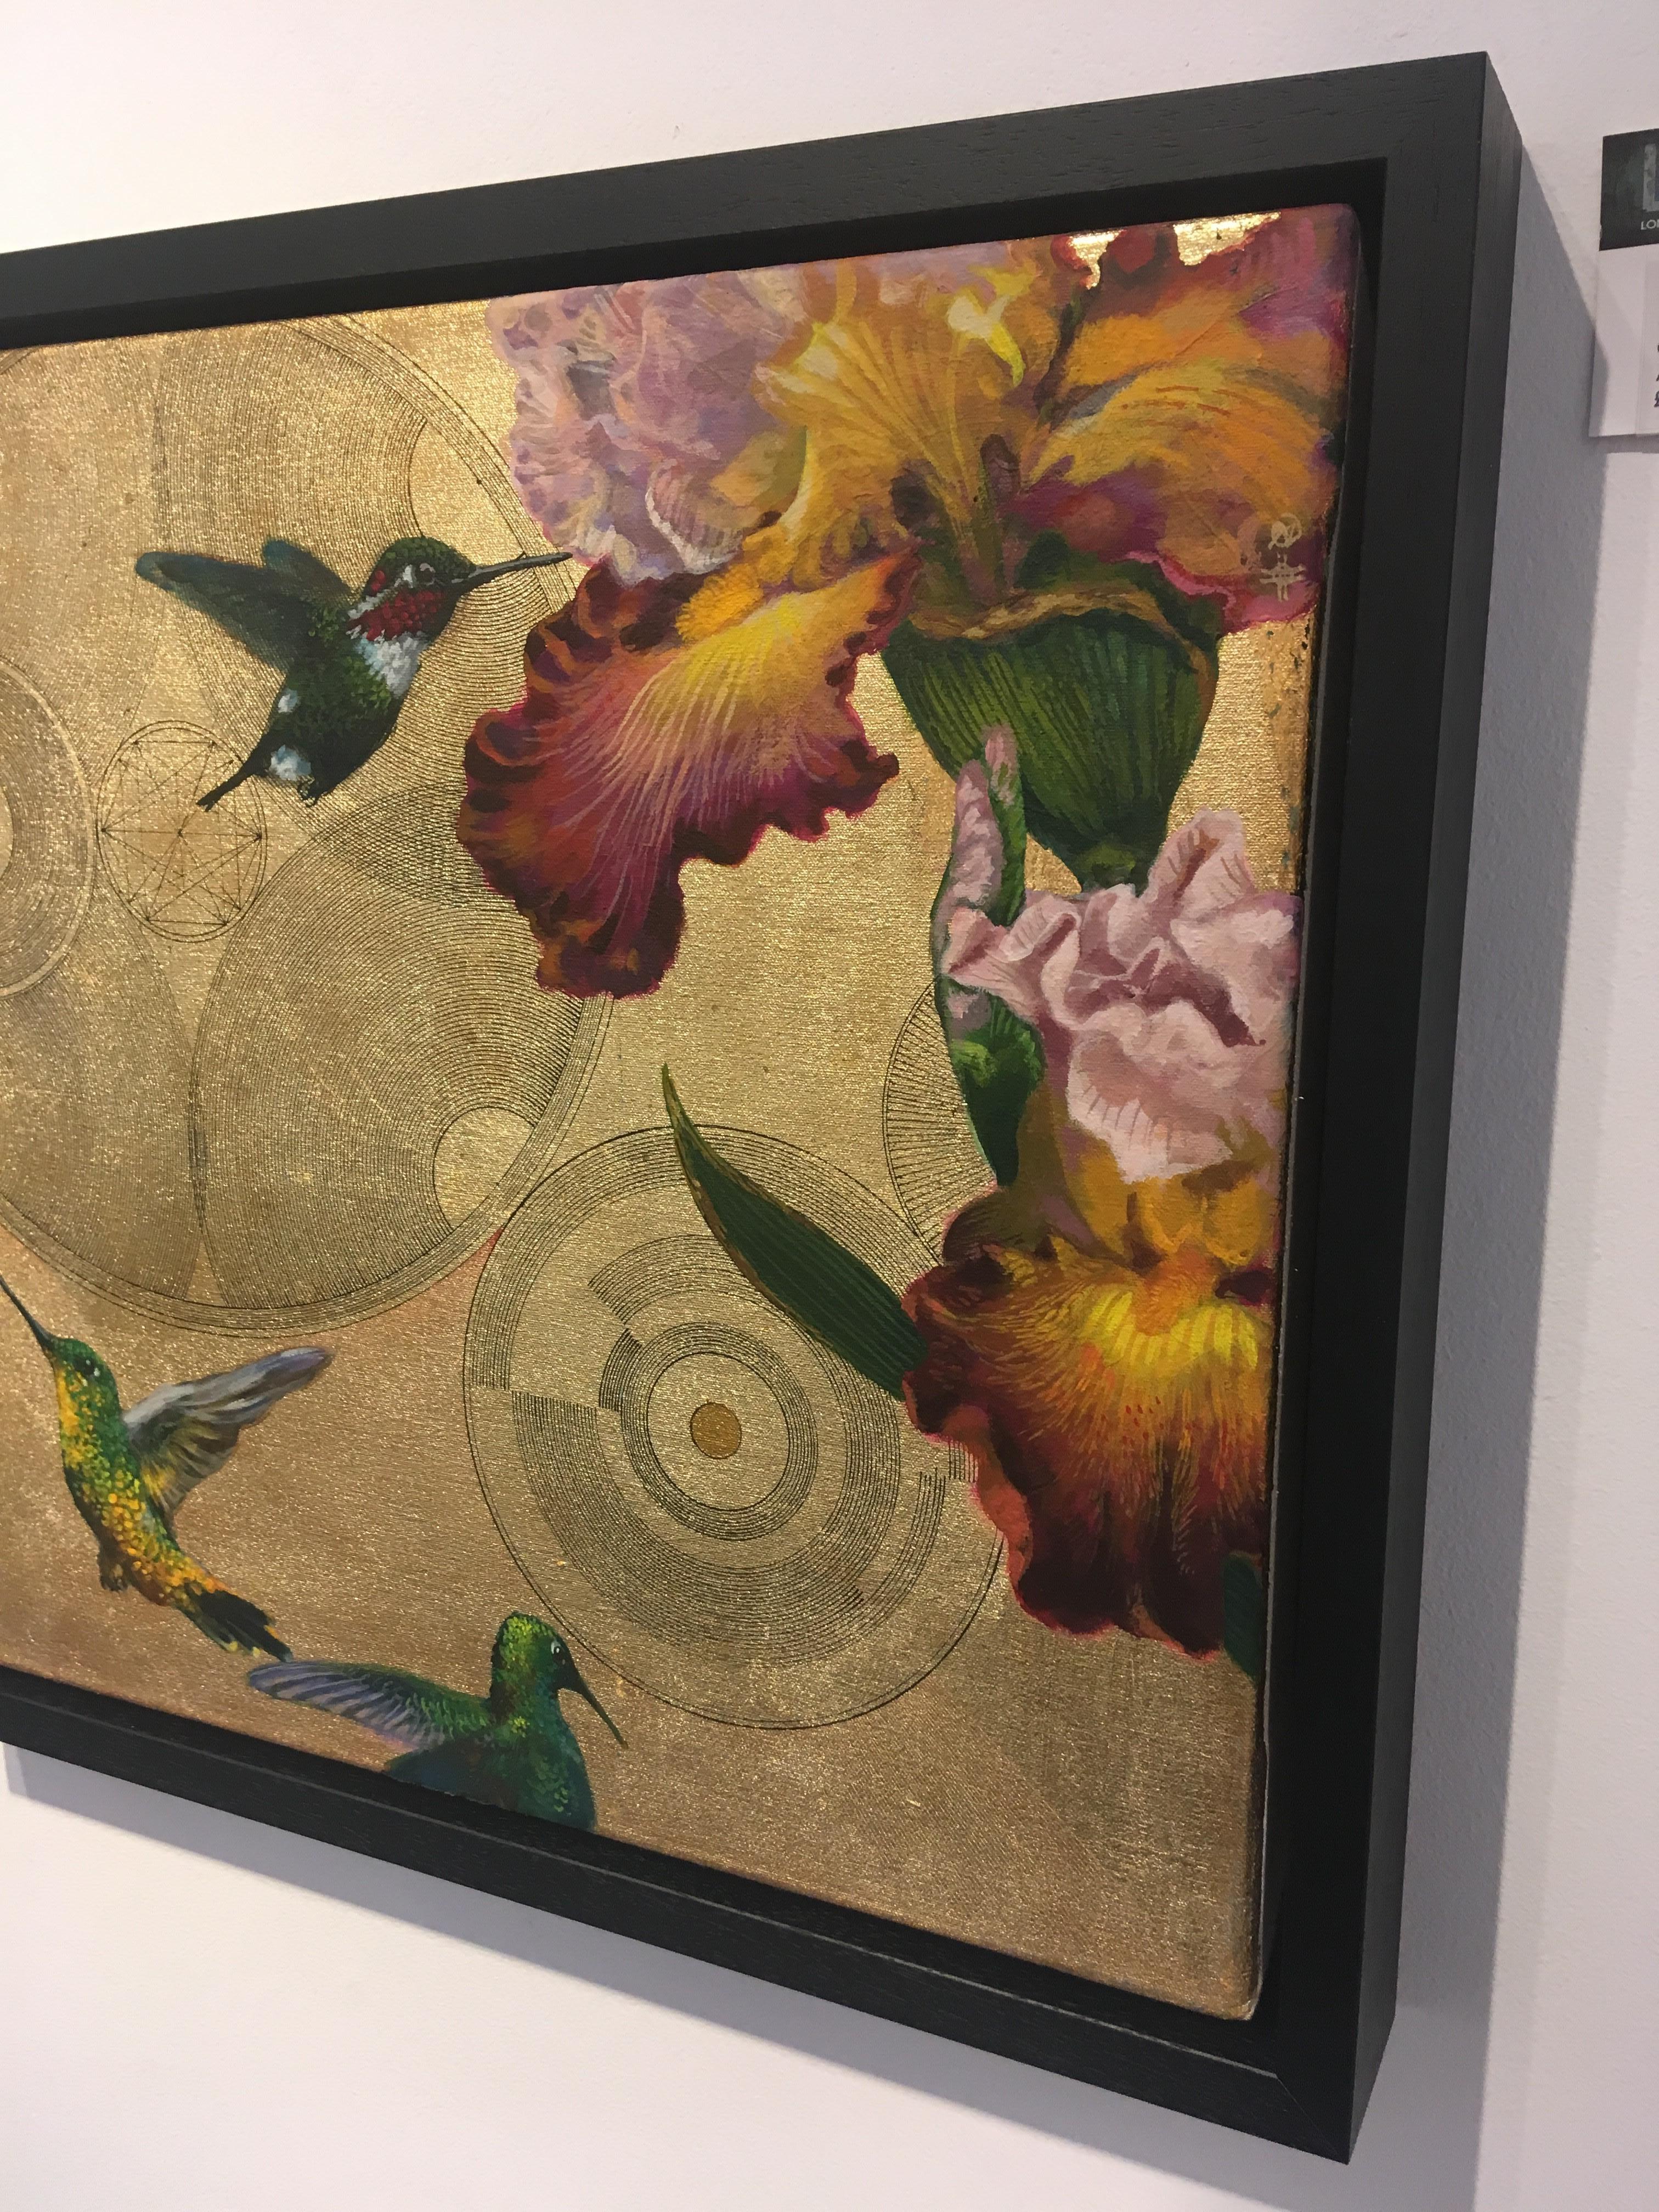 Oro 23 - collaborative work, decorative mixed media with gold, birds and flowers - Gold Animal Painting by Keng Wai Lee & Marco Araldi